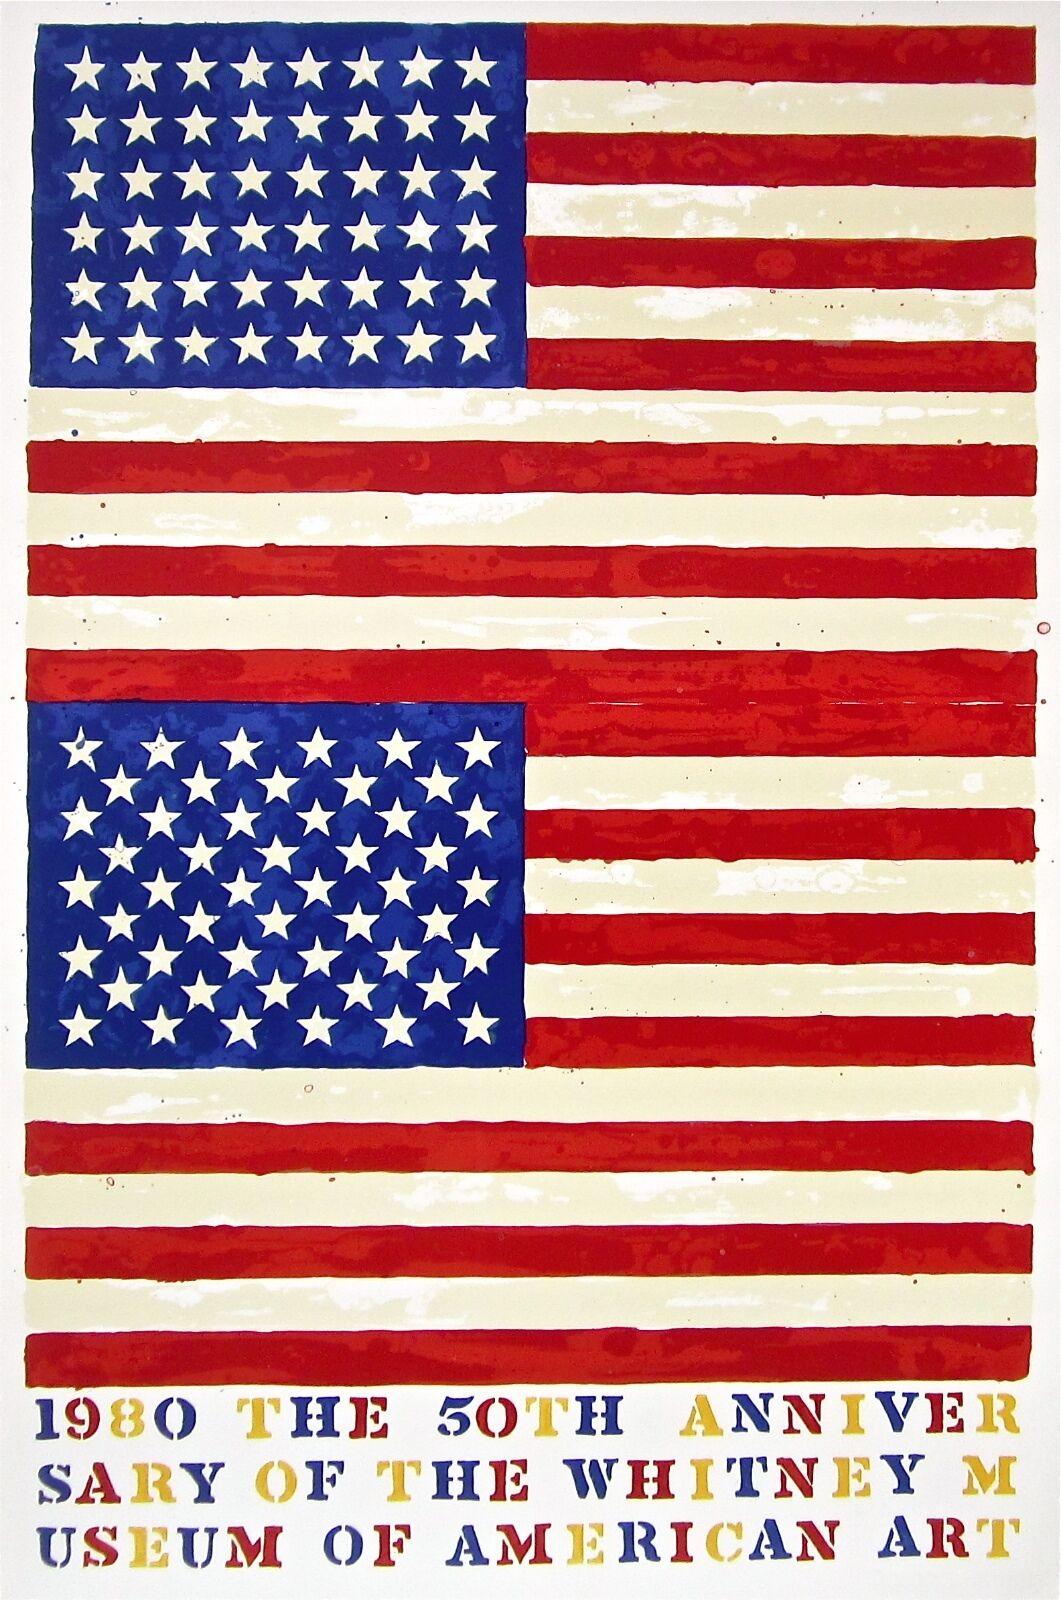 Artist: After Jasper Johns (1930)
Title: Double Flags
Year: 1979-80
Medium: Lithograph exhibition poster on wove paper
Edition: 5,000
Size: 46 x 30 inches
Condition: Excellent
Notes: Co-published by the artist, and Gemini G.E.L.

JASPER JOHNS (1930-